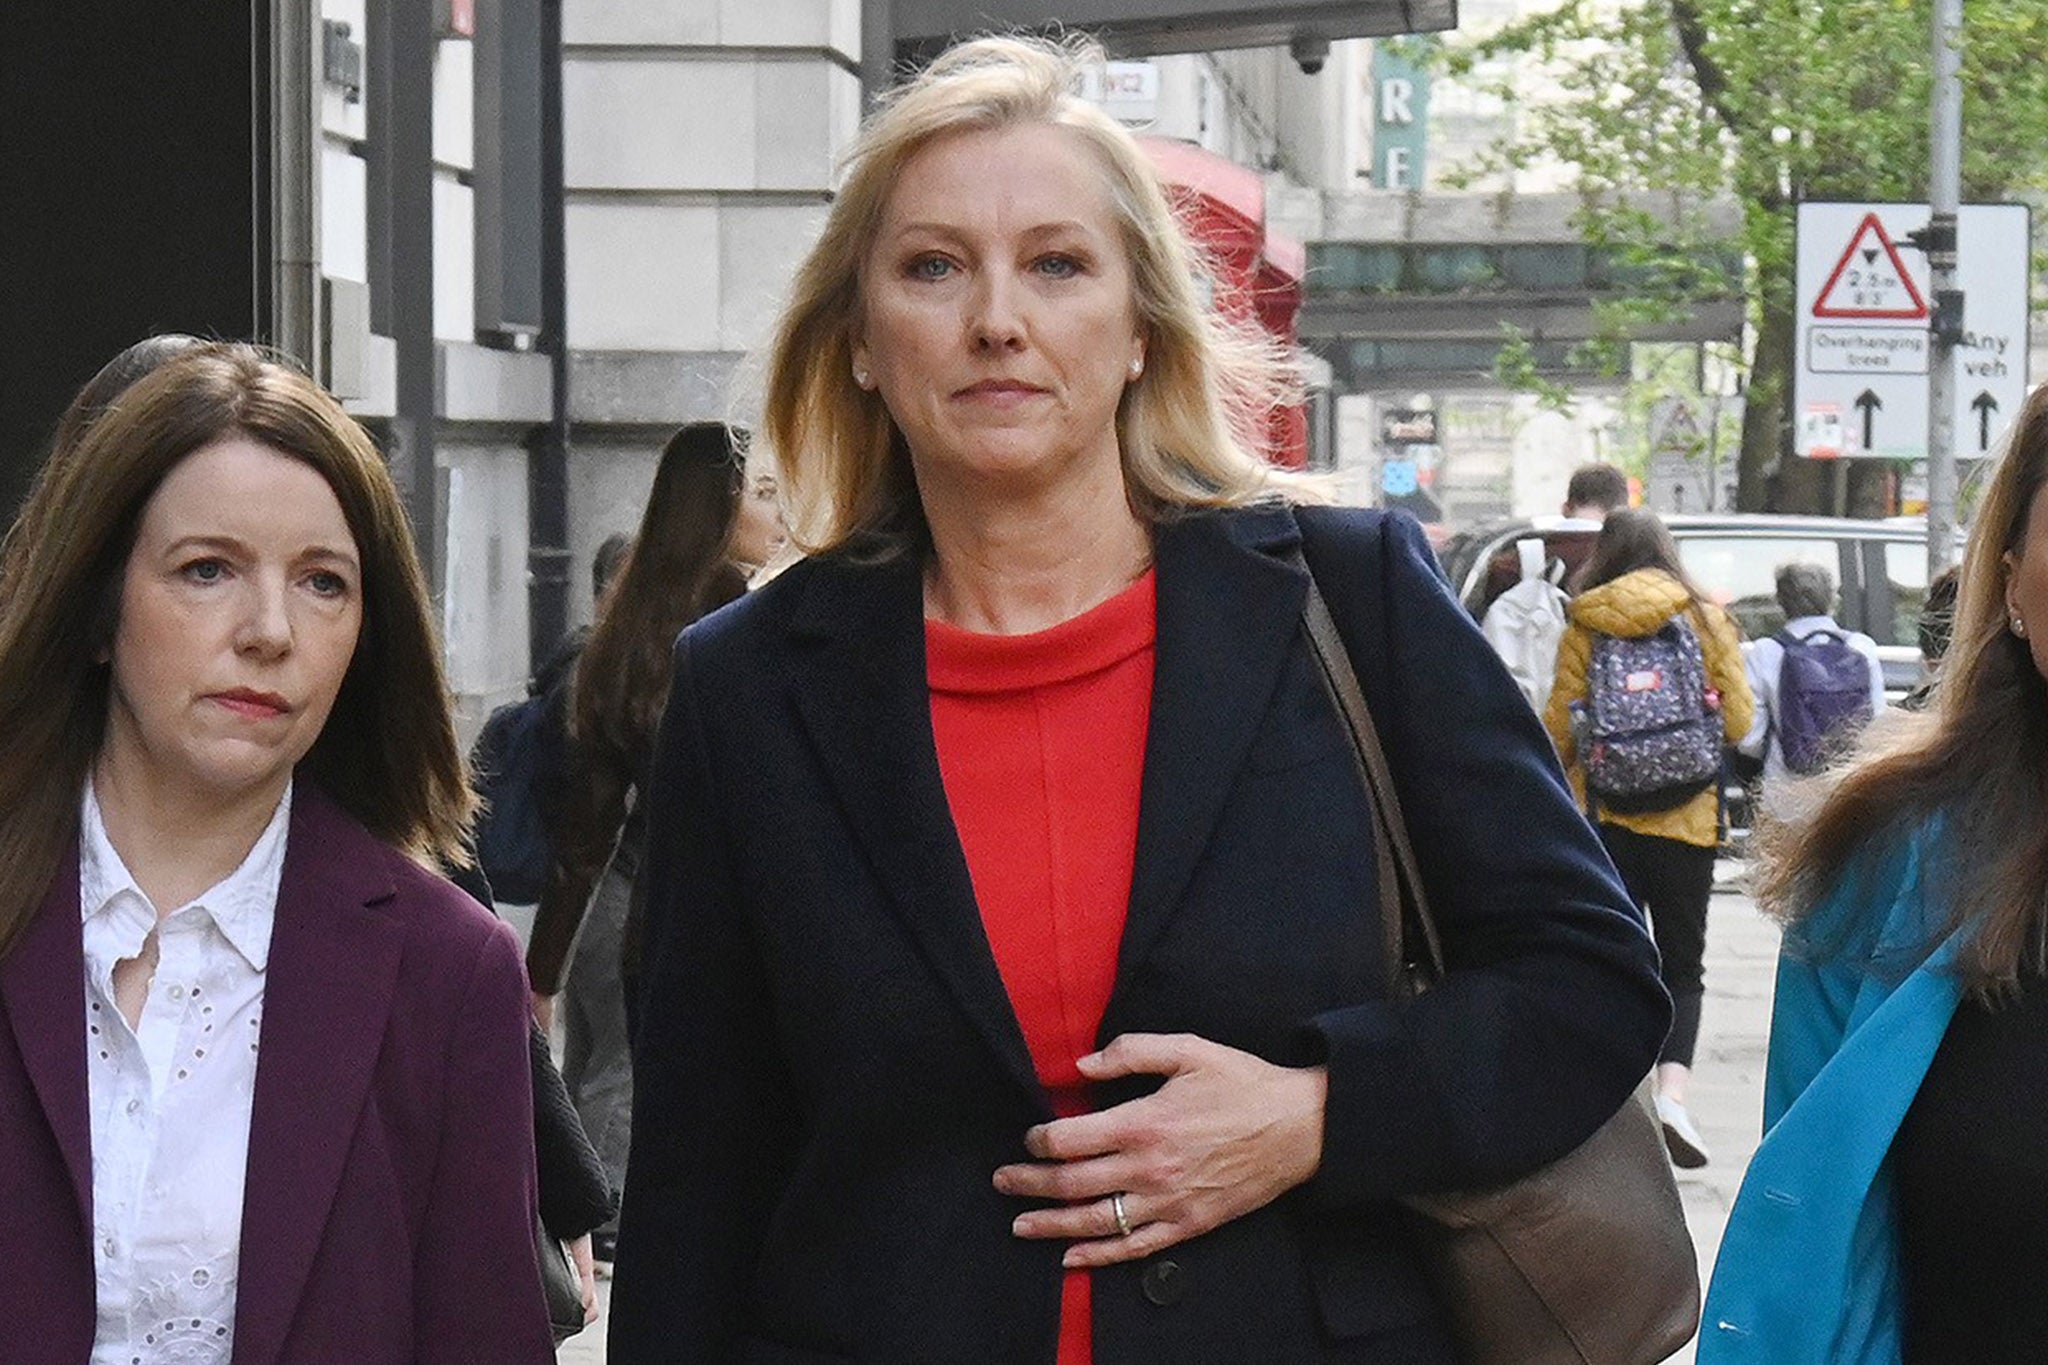 BBC presenter Martine Croxall has appeared at her employment tribunal to mark the beginning of her legal action against the broadcaster